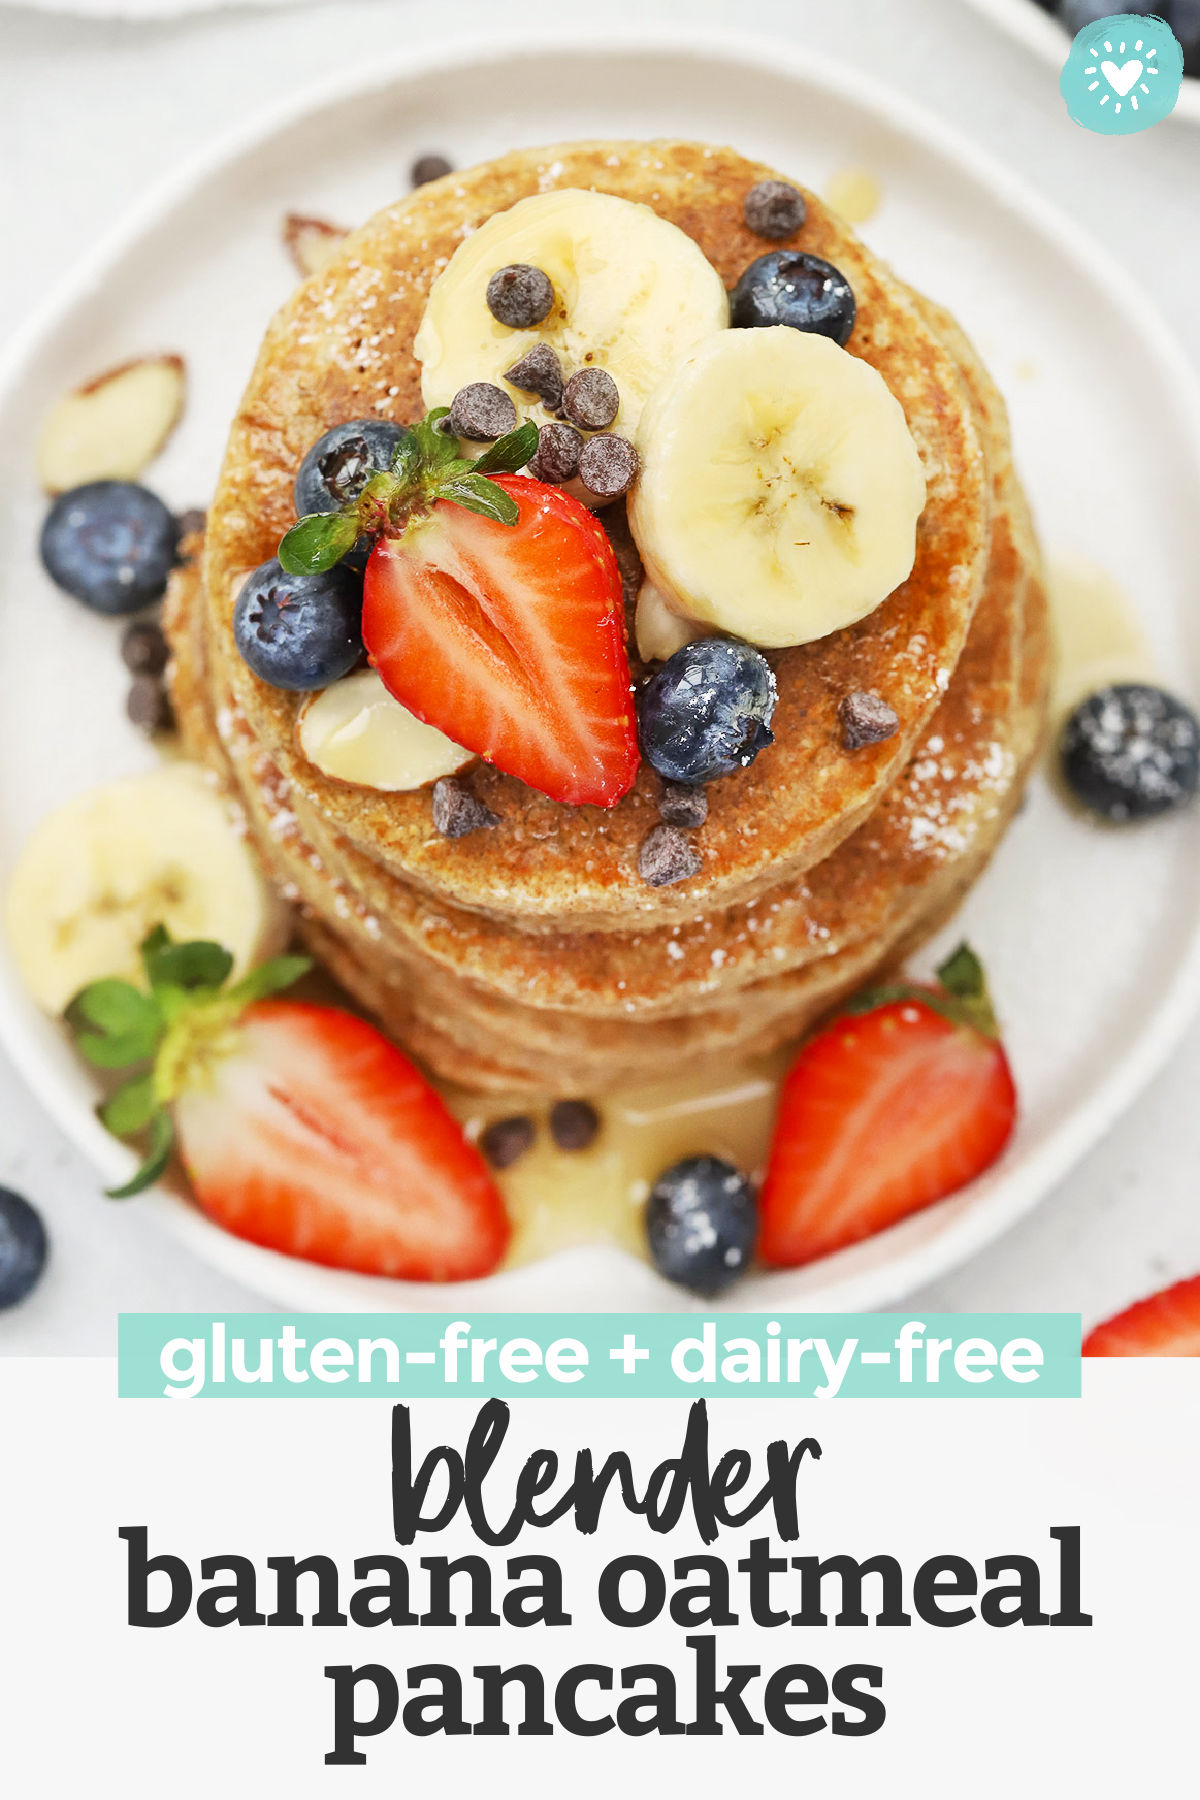 Blender Banana Oatmeal Pancakes - These healthy banana oatmeal pancakes are so easy! The perfect pancakes for weekdays or lazy weekends. (Gluten-free, dairy-free) // Healthy banana pancakes // banana oat pancakes // gluten-free banana pancakes #pancakes #glutenfree #healthybreakfast #banana #oatmeal